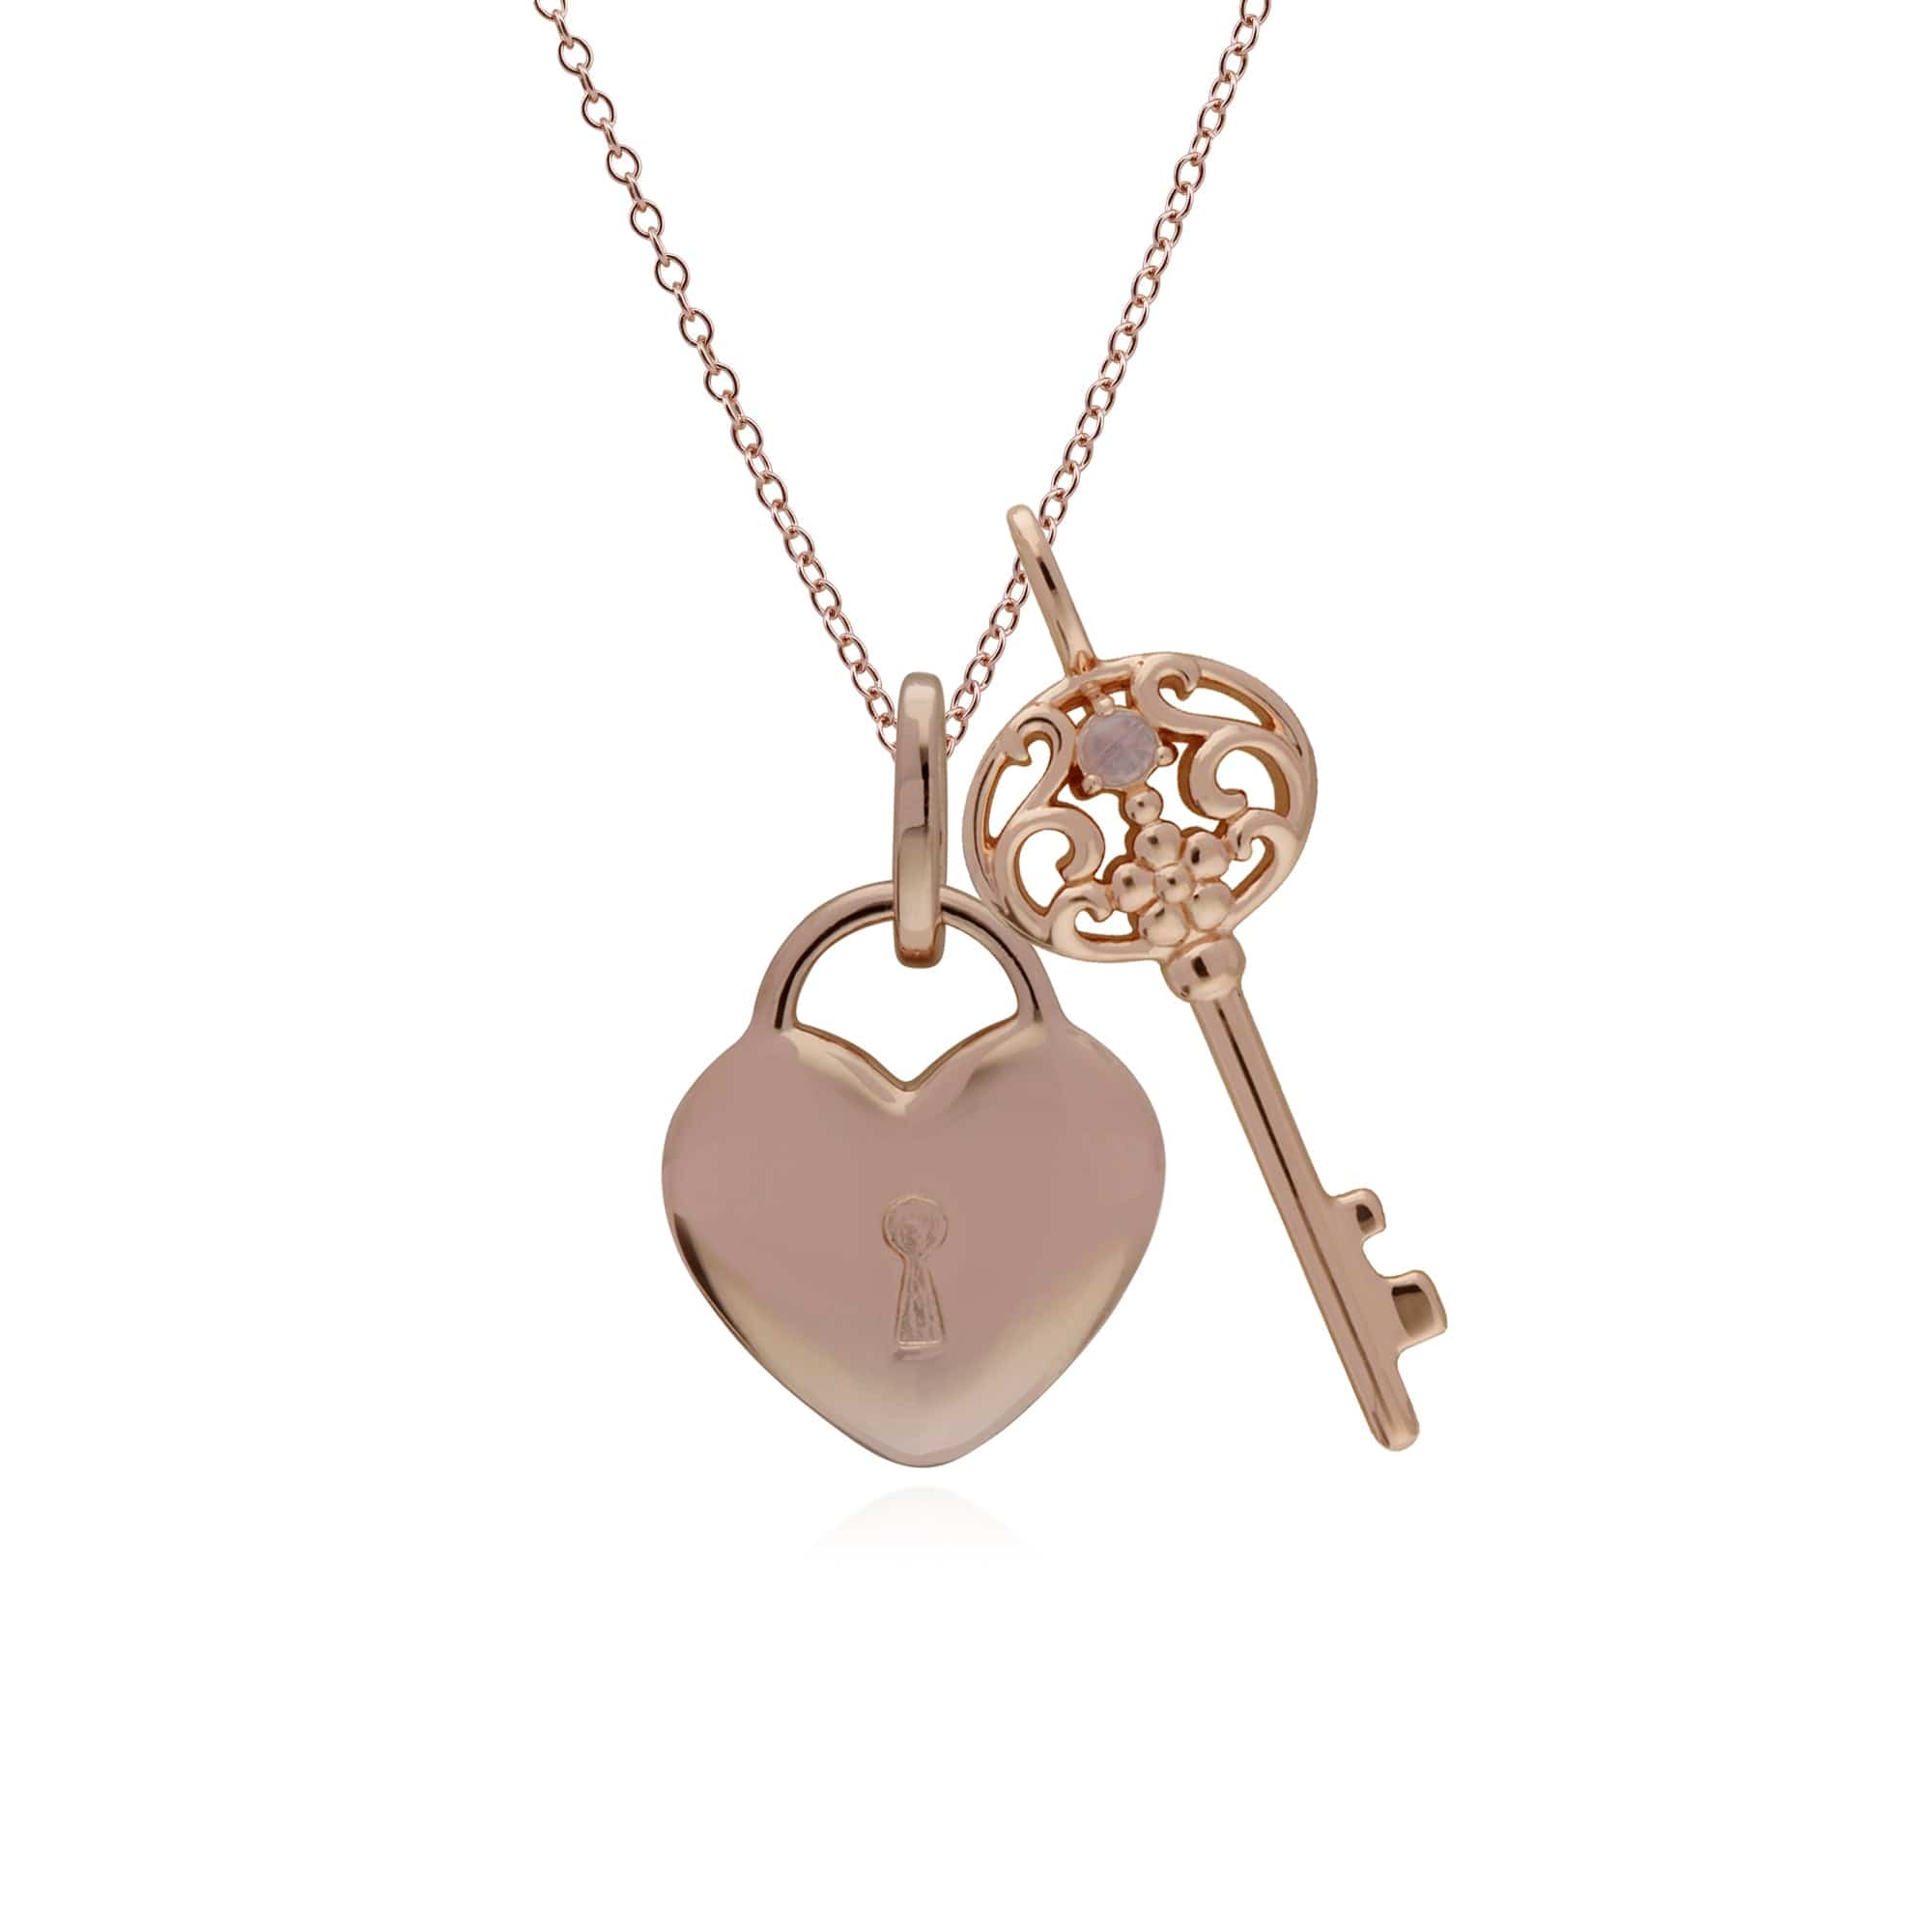 270P026713925-270P026901925 Classic Heart Lock Pendant & Rainbow Moonstone Big Key Charm in Rose Gold Plated 925 Sterling Silver 1